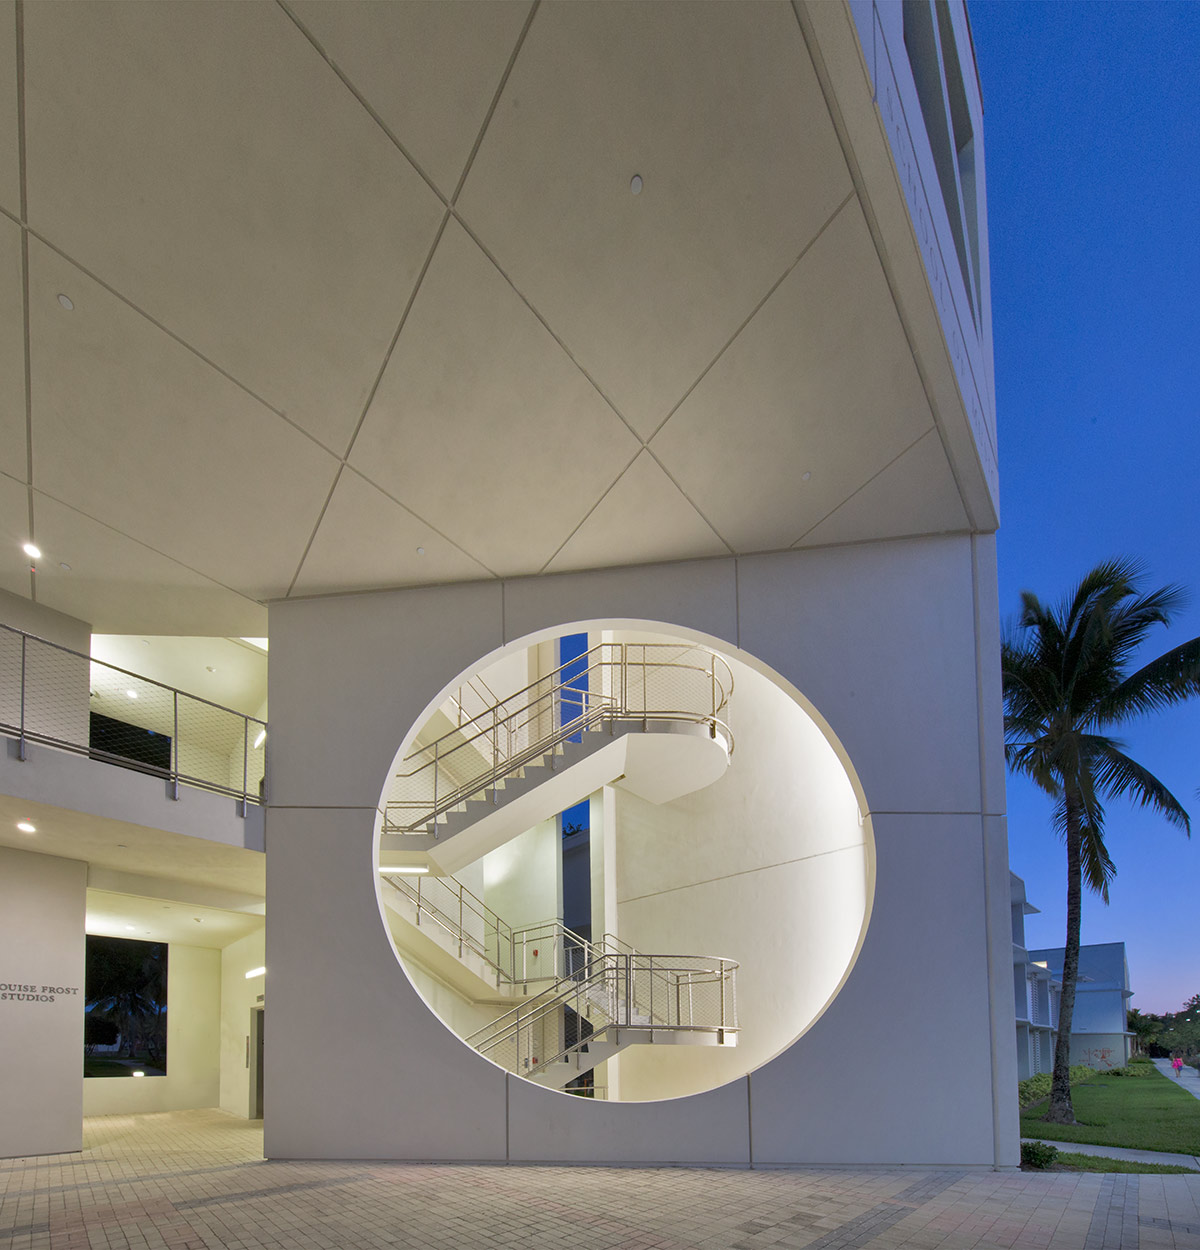 Architectural dusk view of the UM Frost School of Music - Miami, FL 